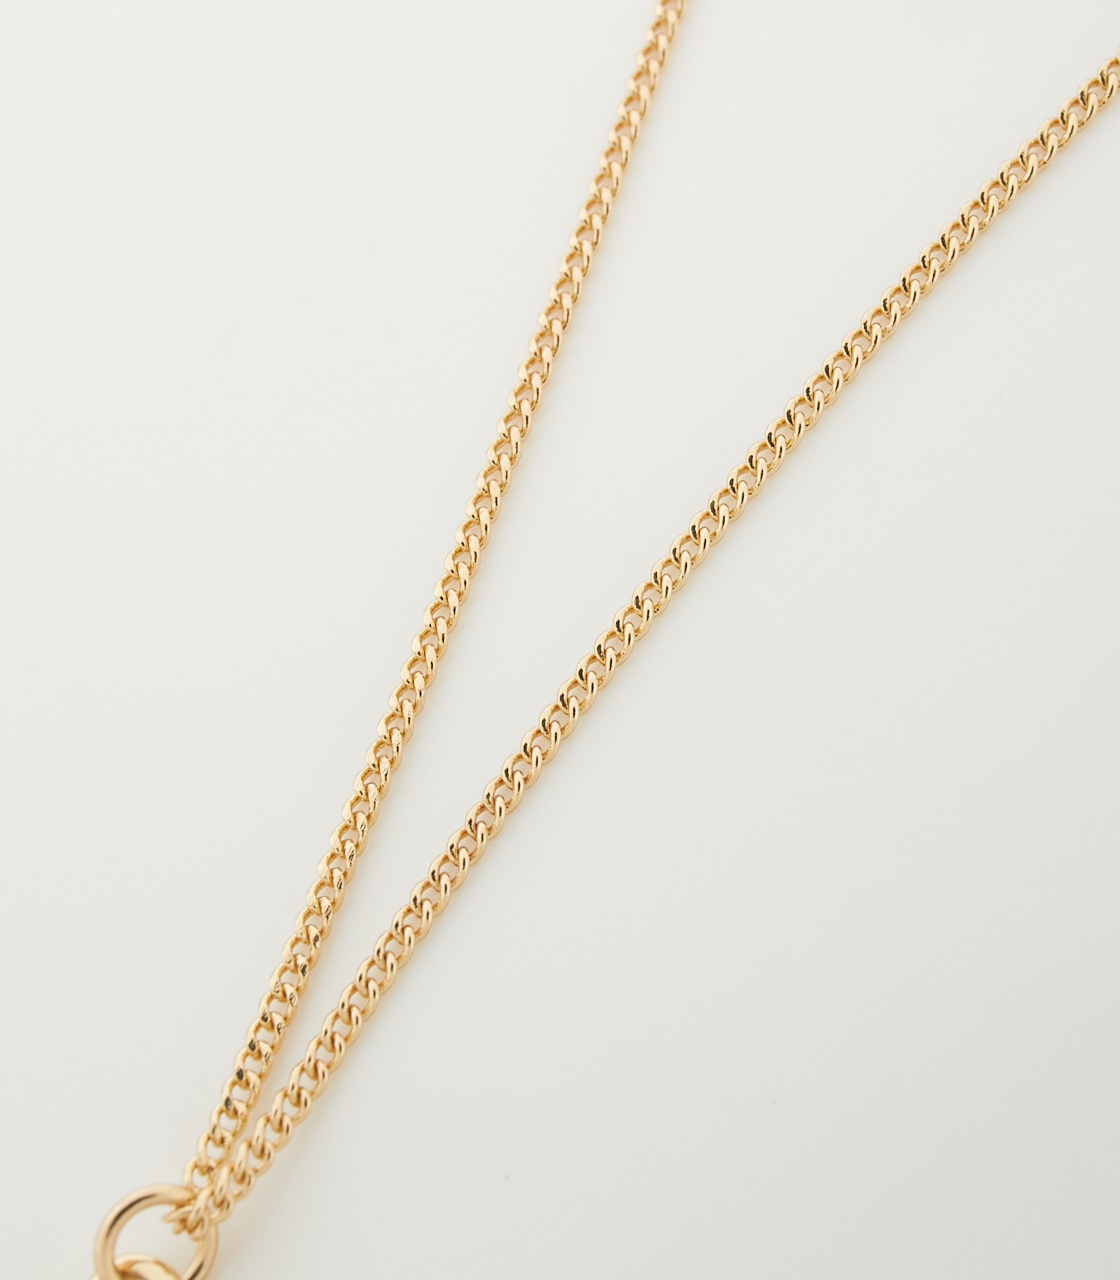 DOUBLE CHAIN MOTIF NECKLACE/ダブルチェーンモチーフネックレス 詳細画像 L/GLD 4